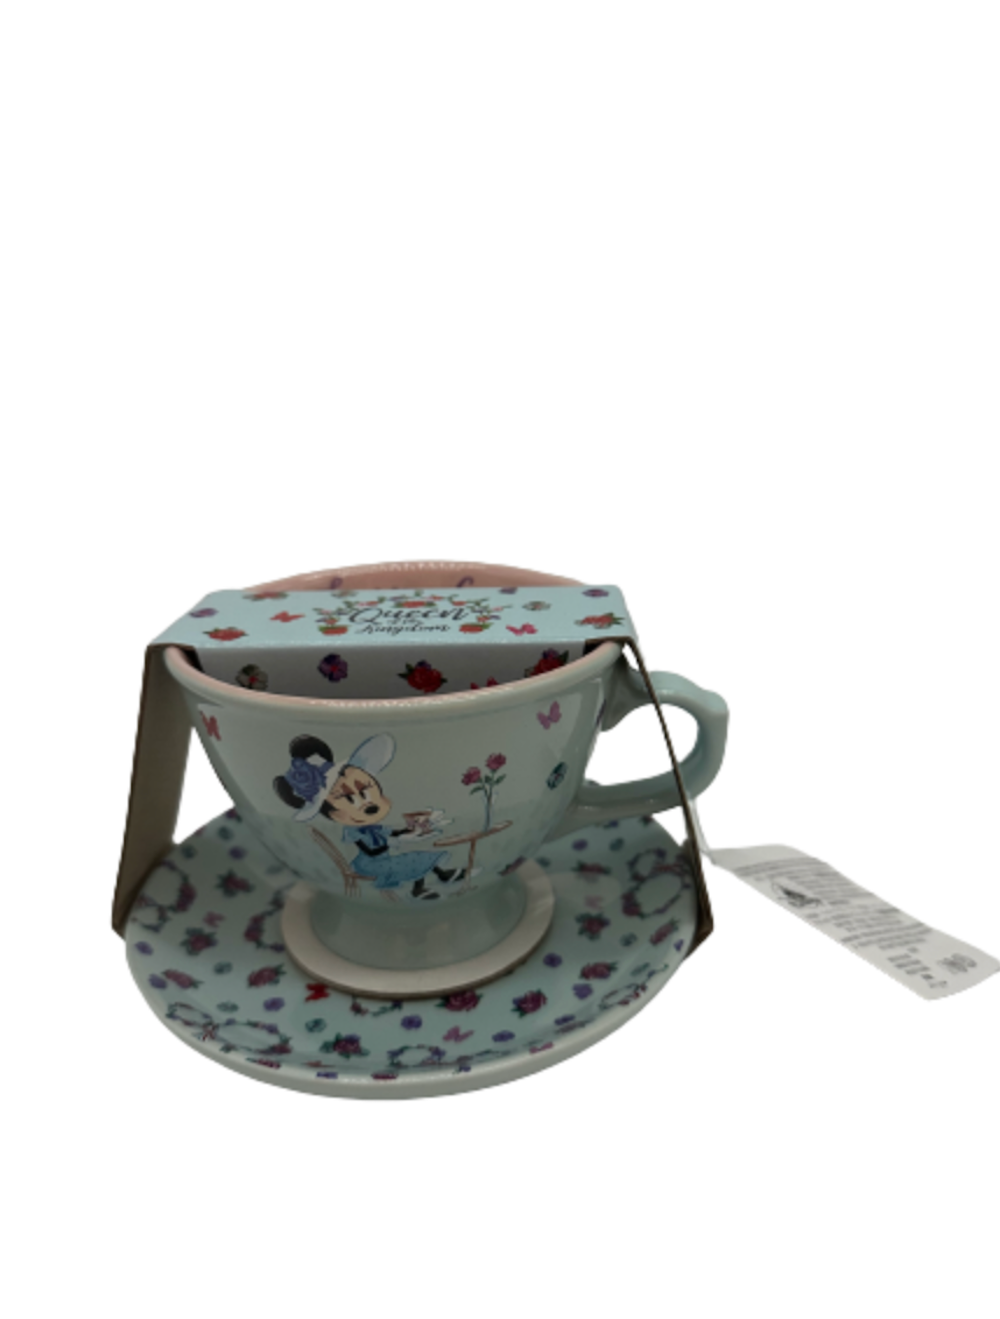 Disney Epcot UK Fancy a Cuppa? Minnie Queen of Kingdom Tea Cup and Saucer New